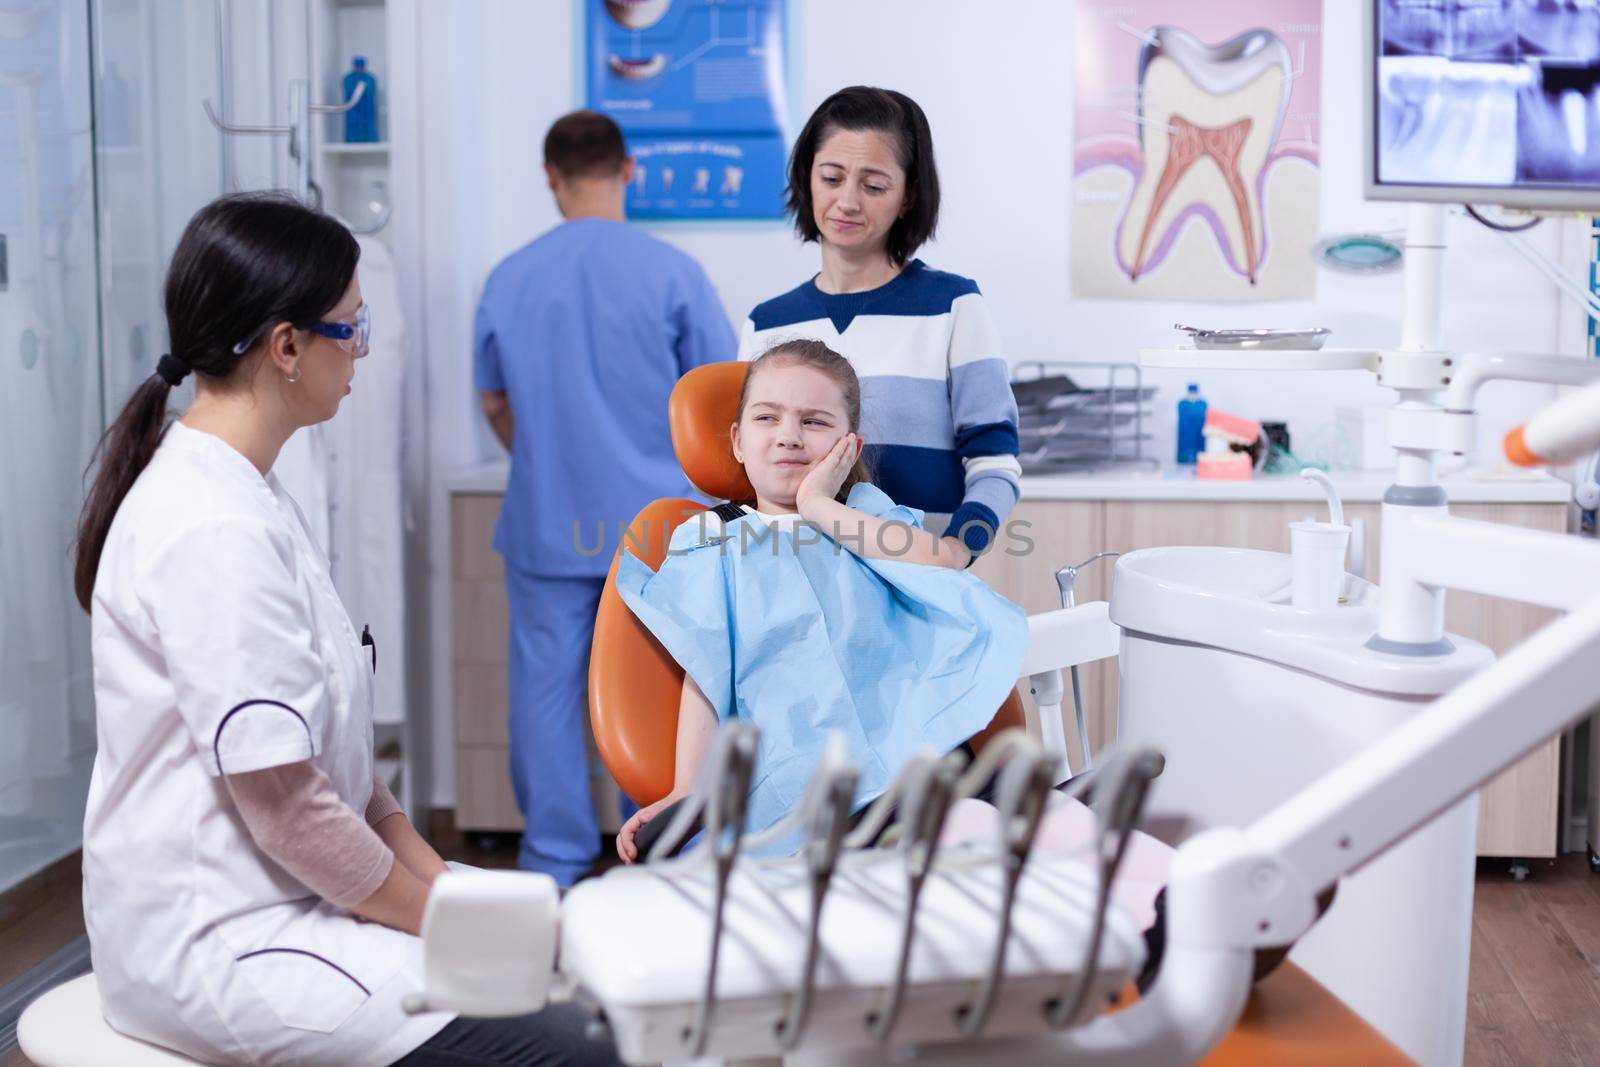 Little girl with painful expression showing dentist where her tooth hurts during dental check up. Child with her mother during teeth check up with stomatolog sitting on chair.